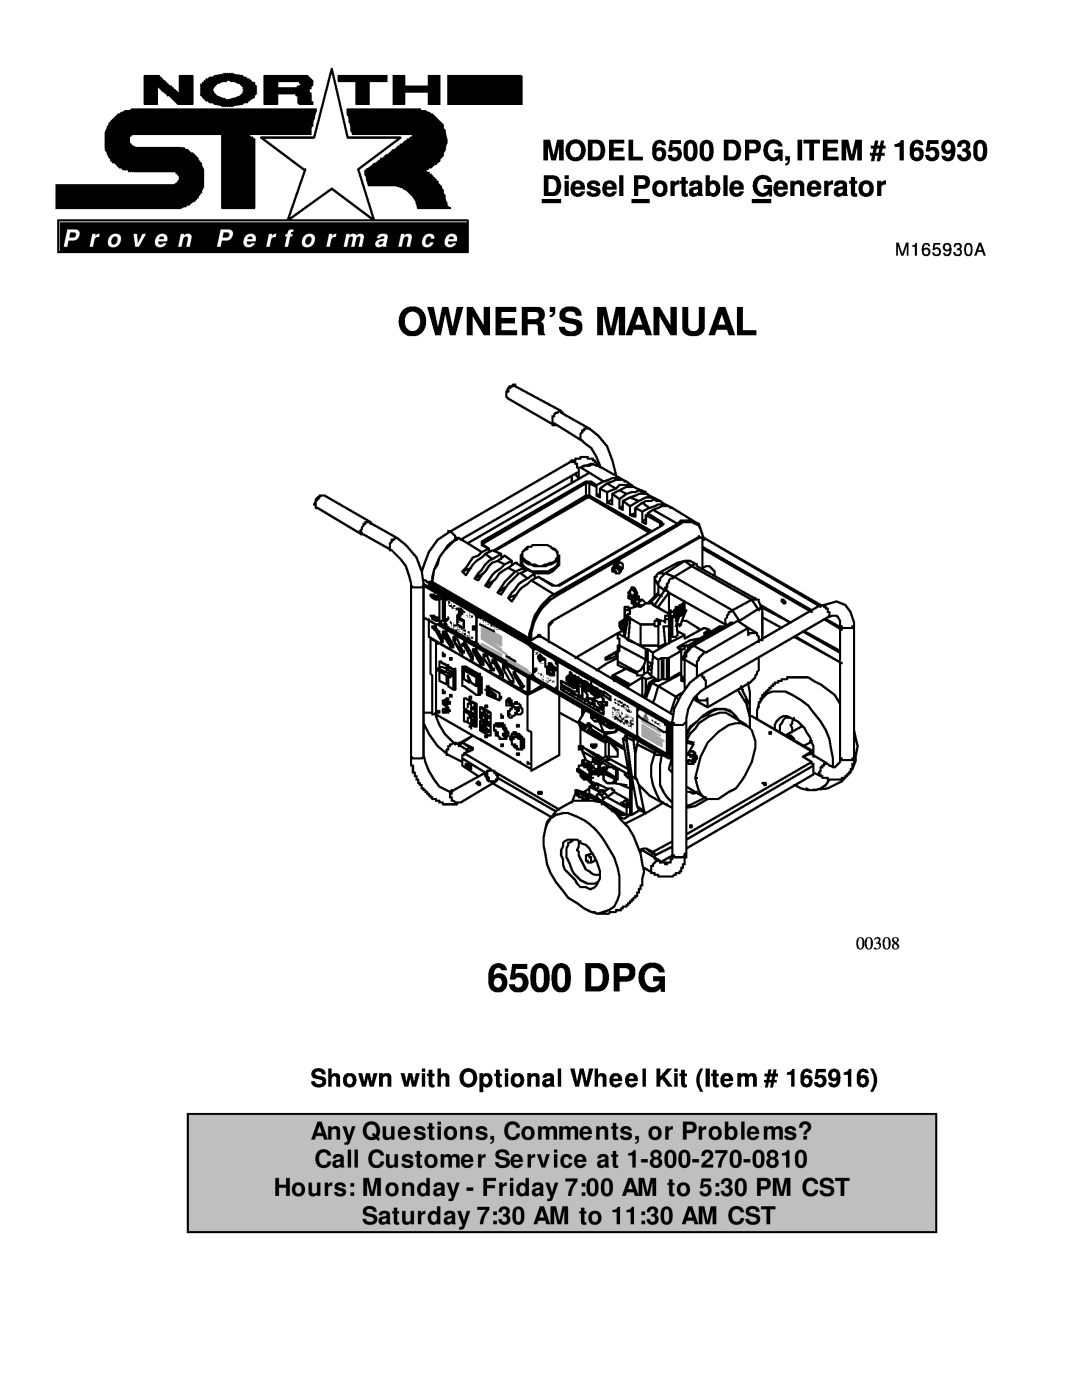 North Star 6500 DPG owner manual Shown with Optional Wheel Kit Item #, P r o v e n P e r f o r m a n c e, 00308 